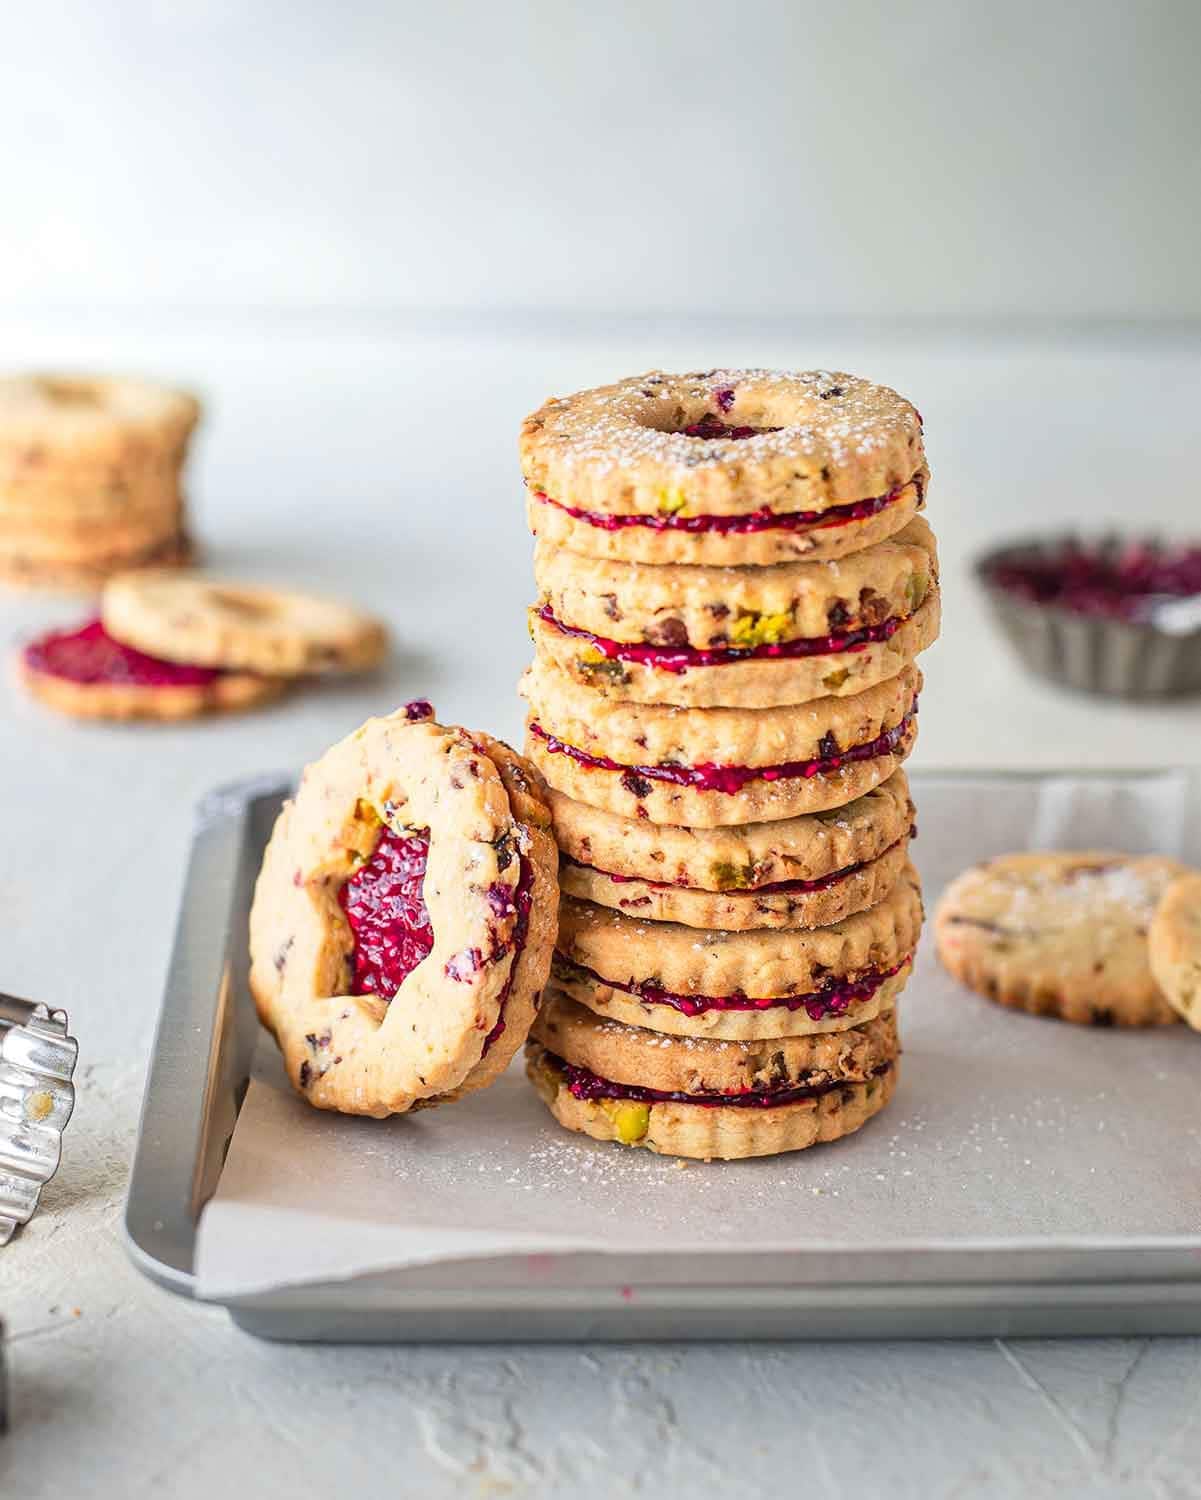 Stack of cookies with pistachio and cranberries filling.